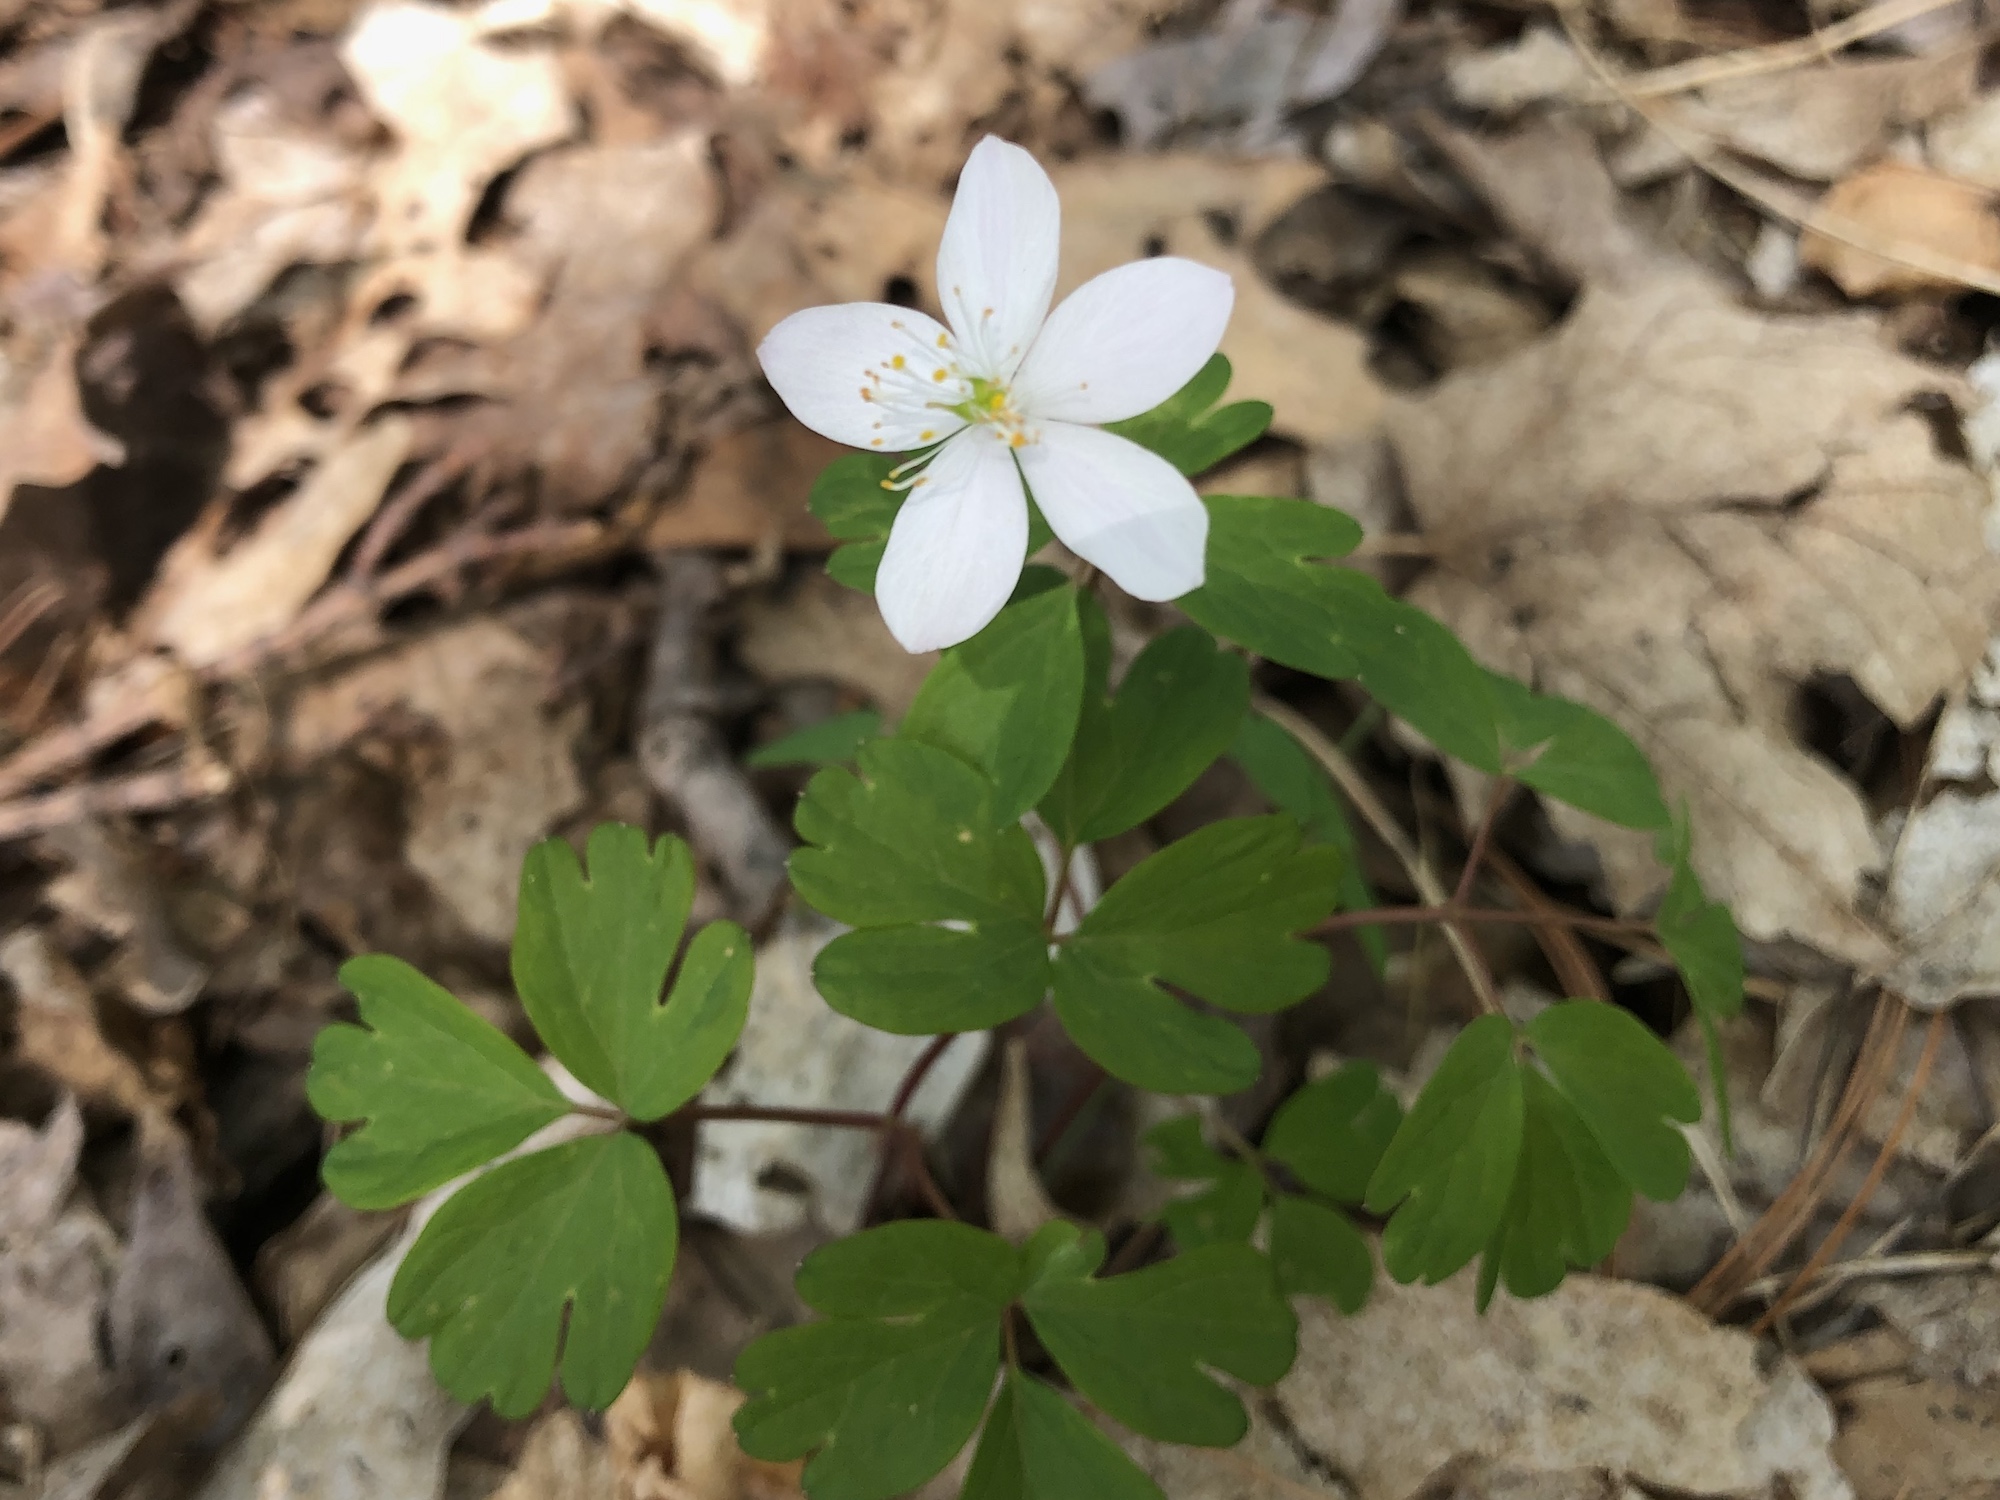 False Rue Anemone in the Maple-Basswood Forest of the University of Wisconsin Arboretum in Madison, Wisconsin on May 6, 2020